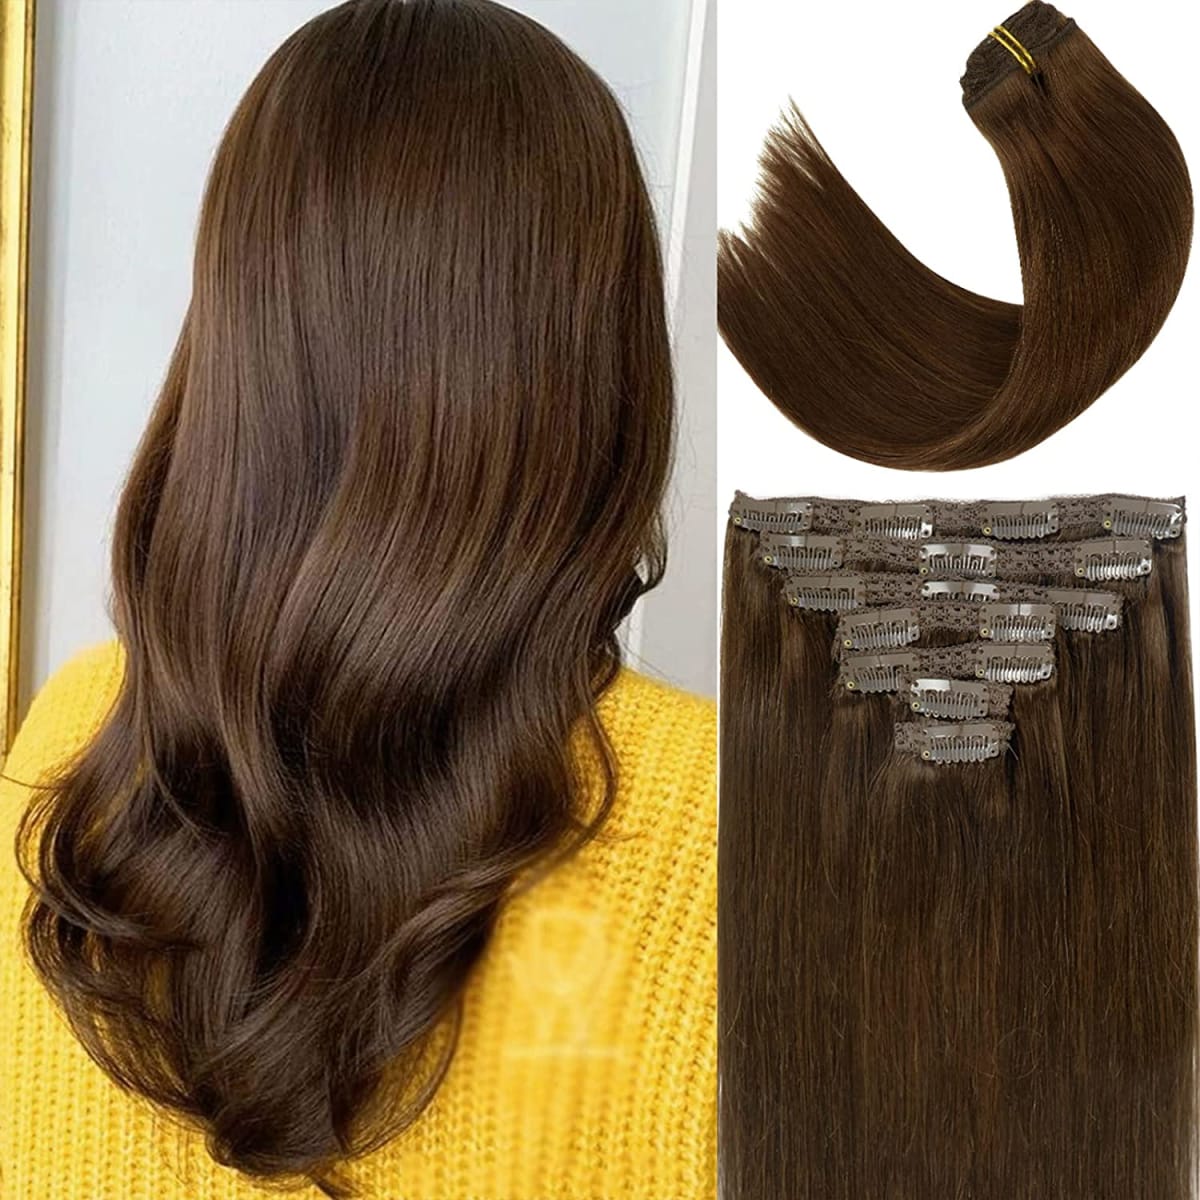 Lacer Hair Extensions Clip In Real Human Hair Extensions 140g 7 Pieces Silky Straight Weft Remy Human Hair Clip in Hair Extensions Chocolate Brown #4 20 Inch